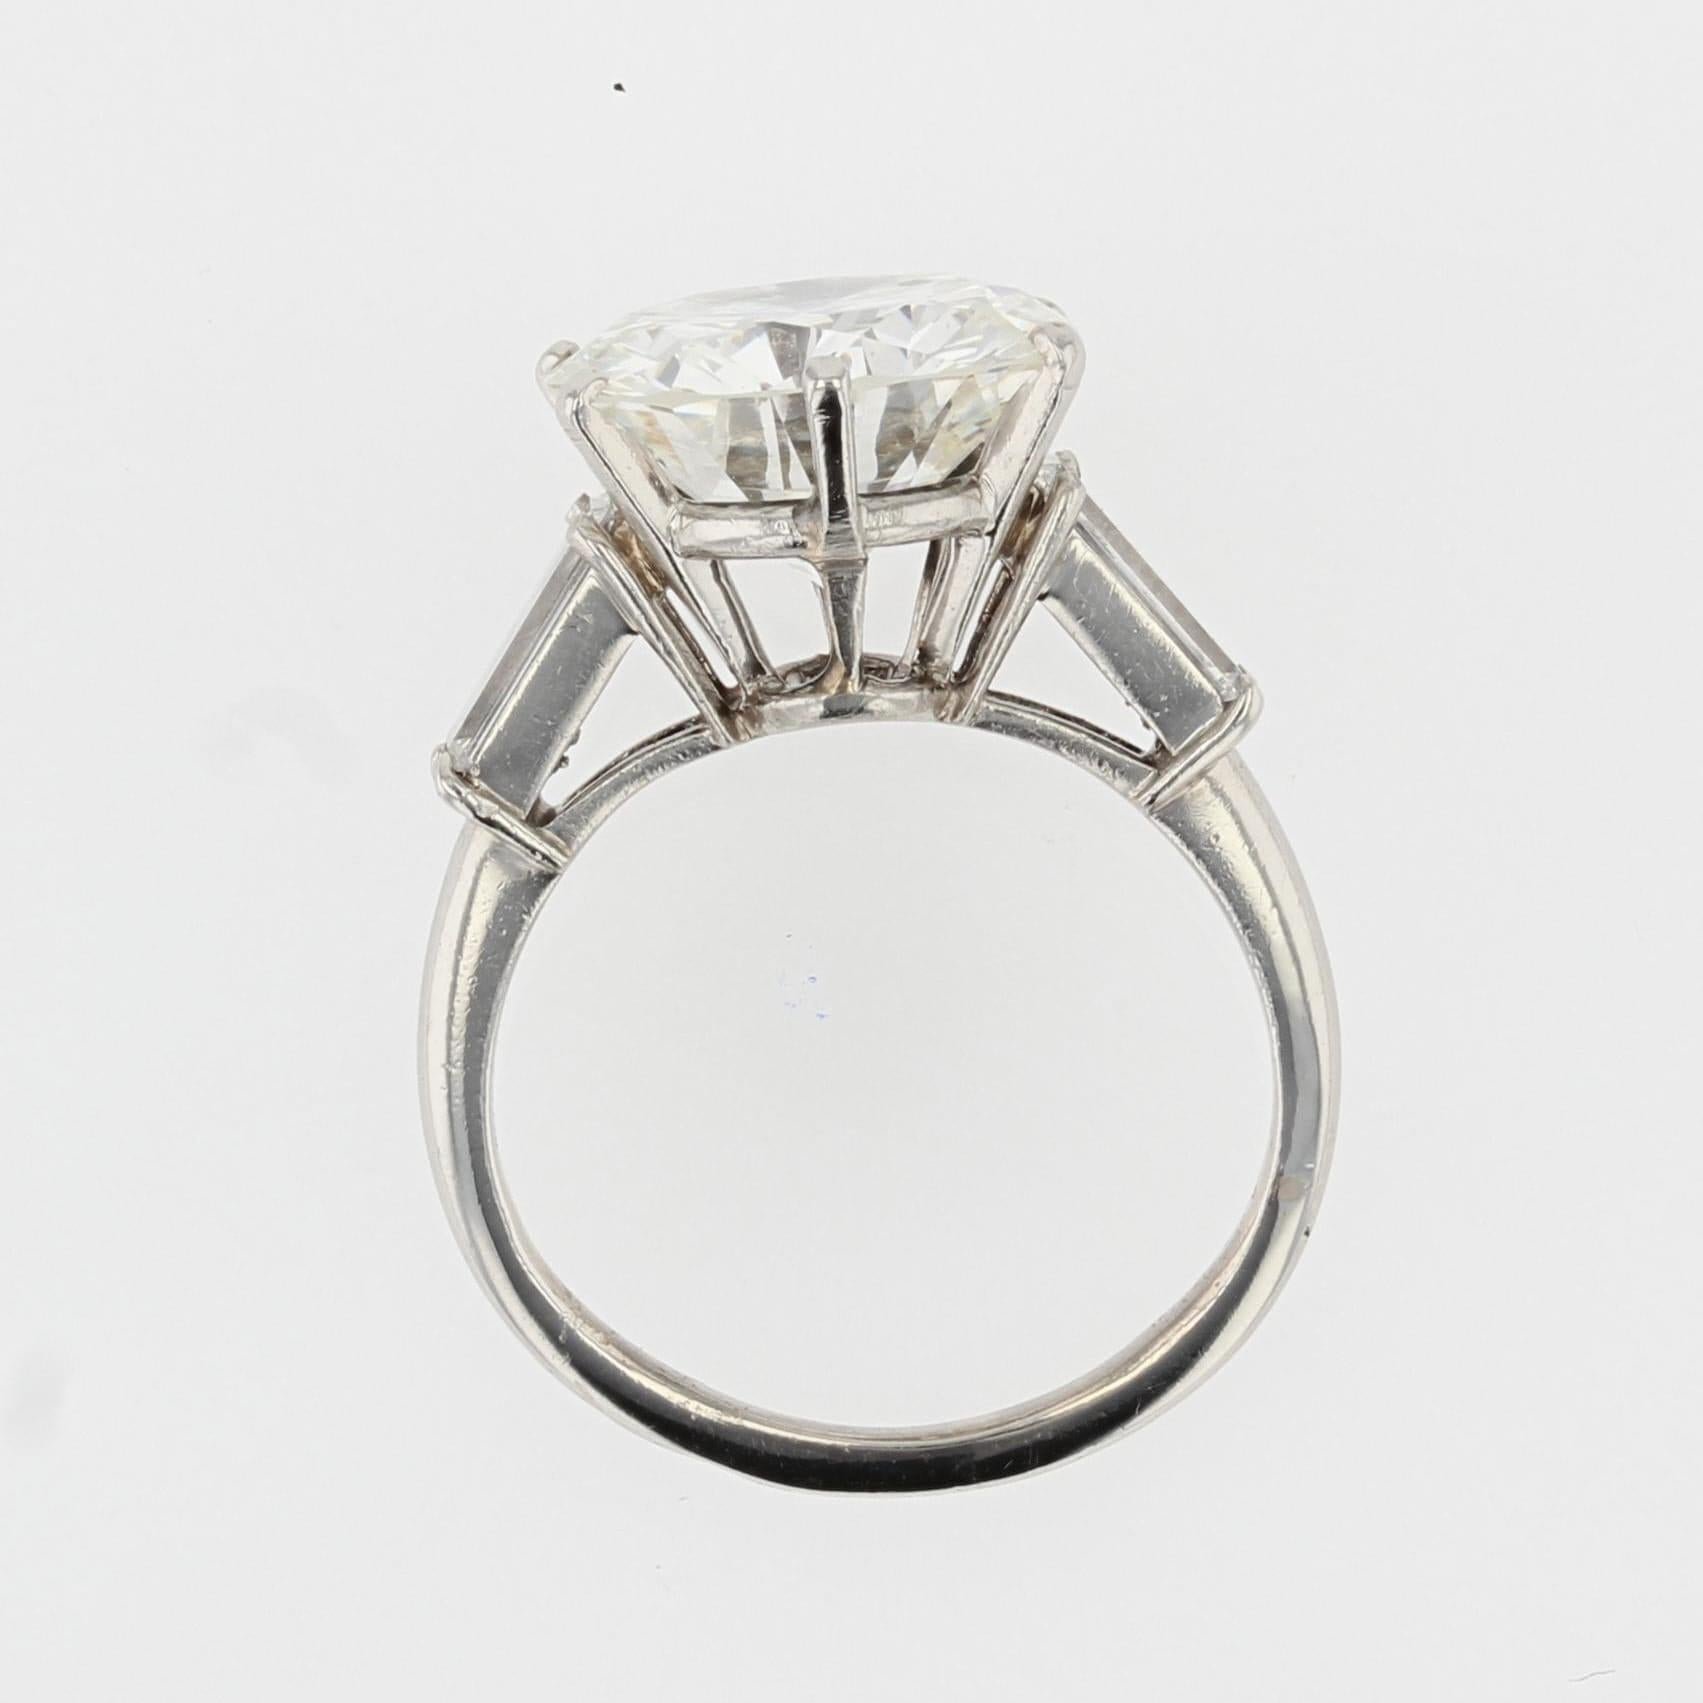 1970s French Mauboussin 4, 17 Carat Diamond Platinum Solitaire Ring For Sale 4